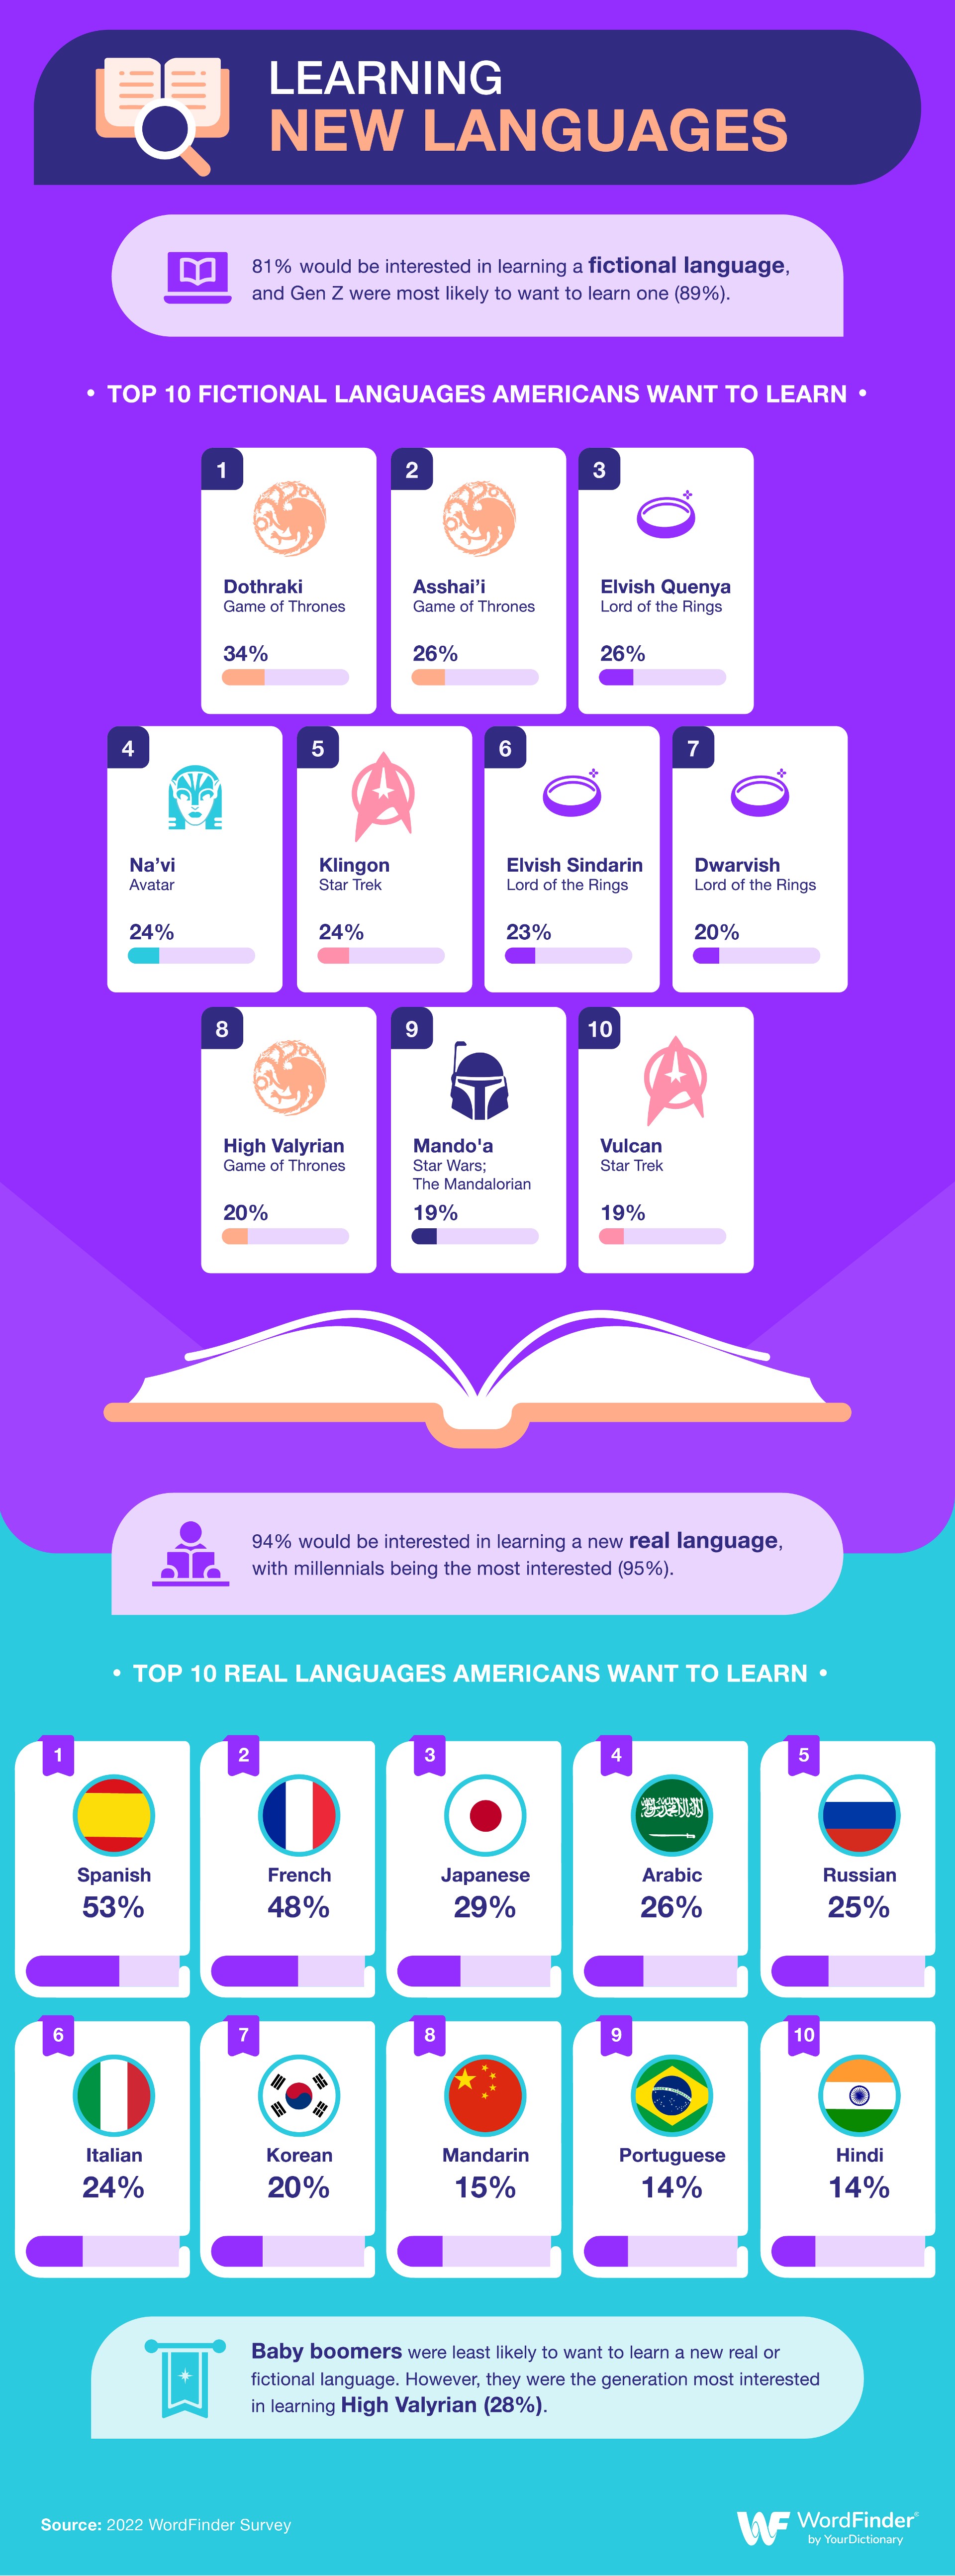 Infographic with people learning fictional languages and real languages